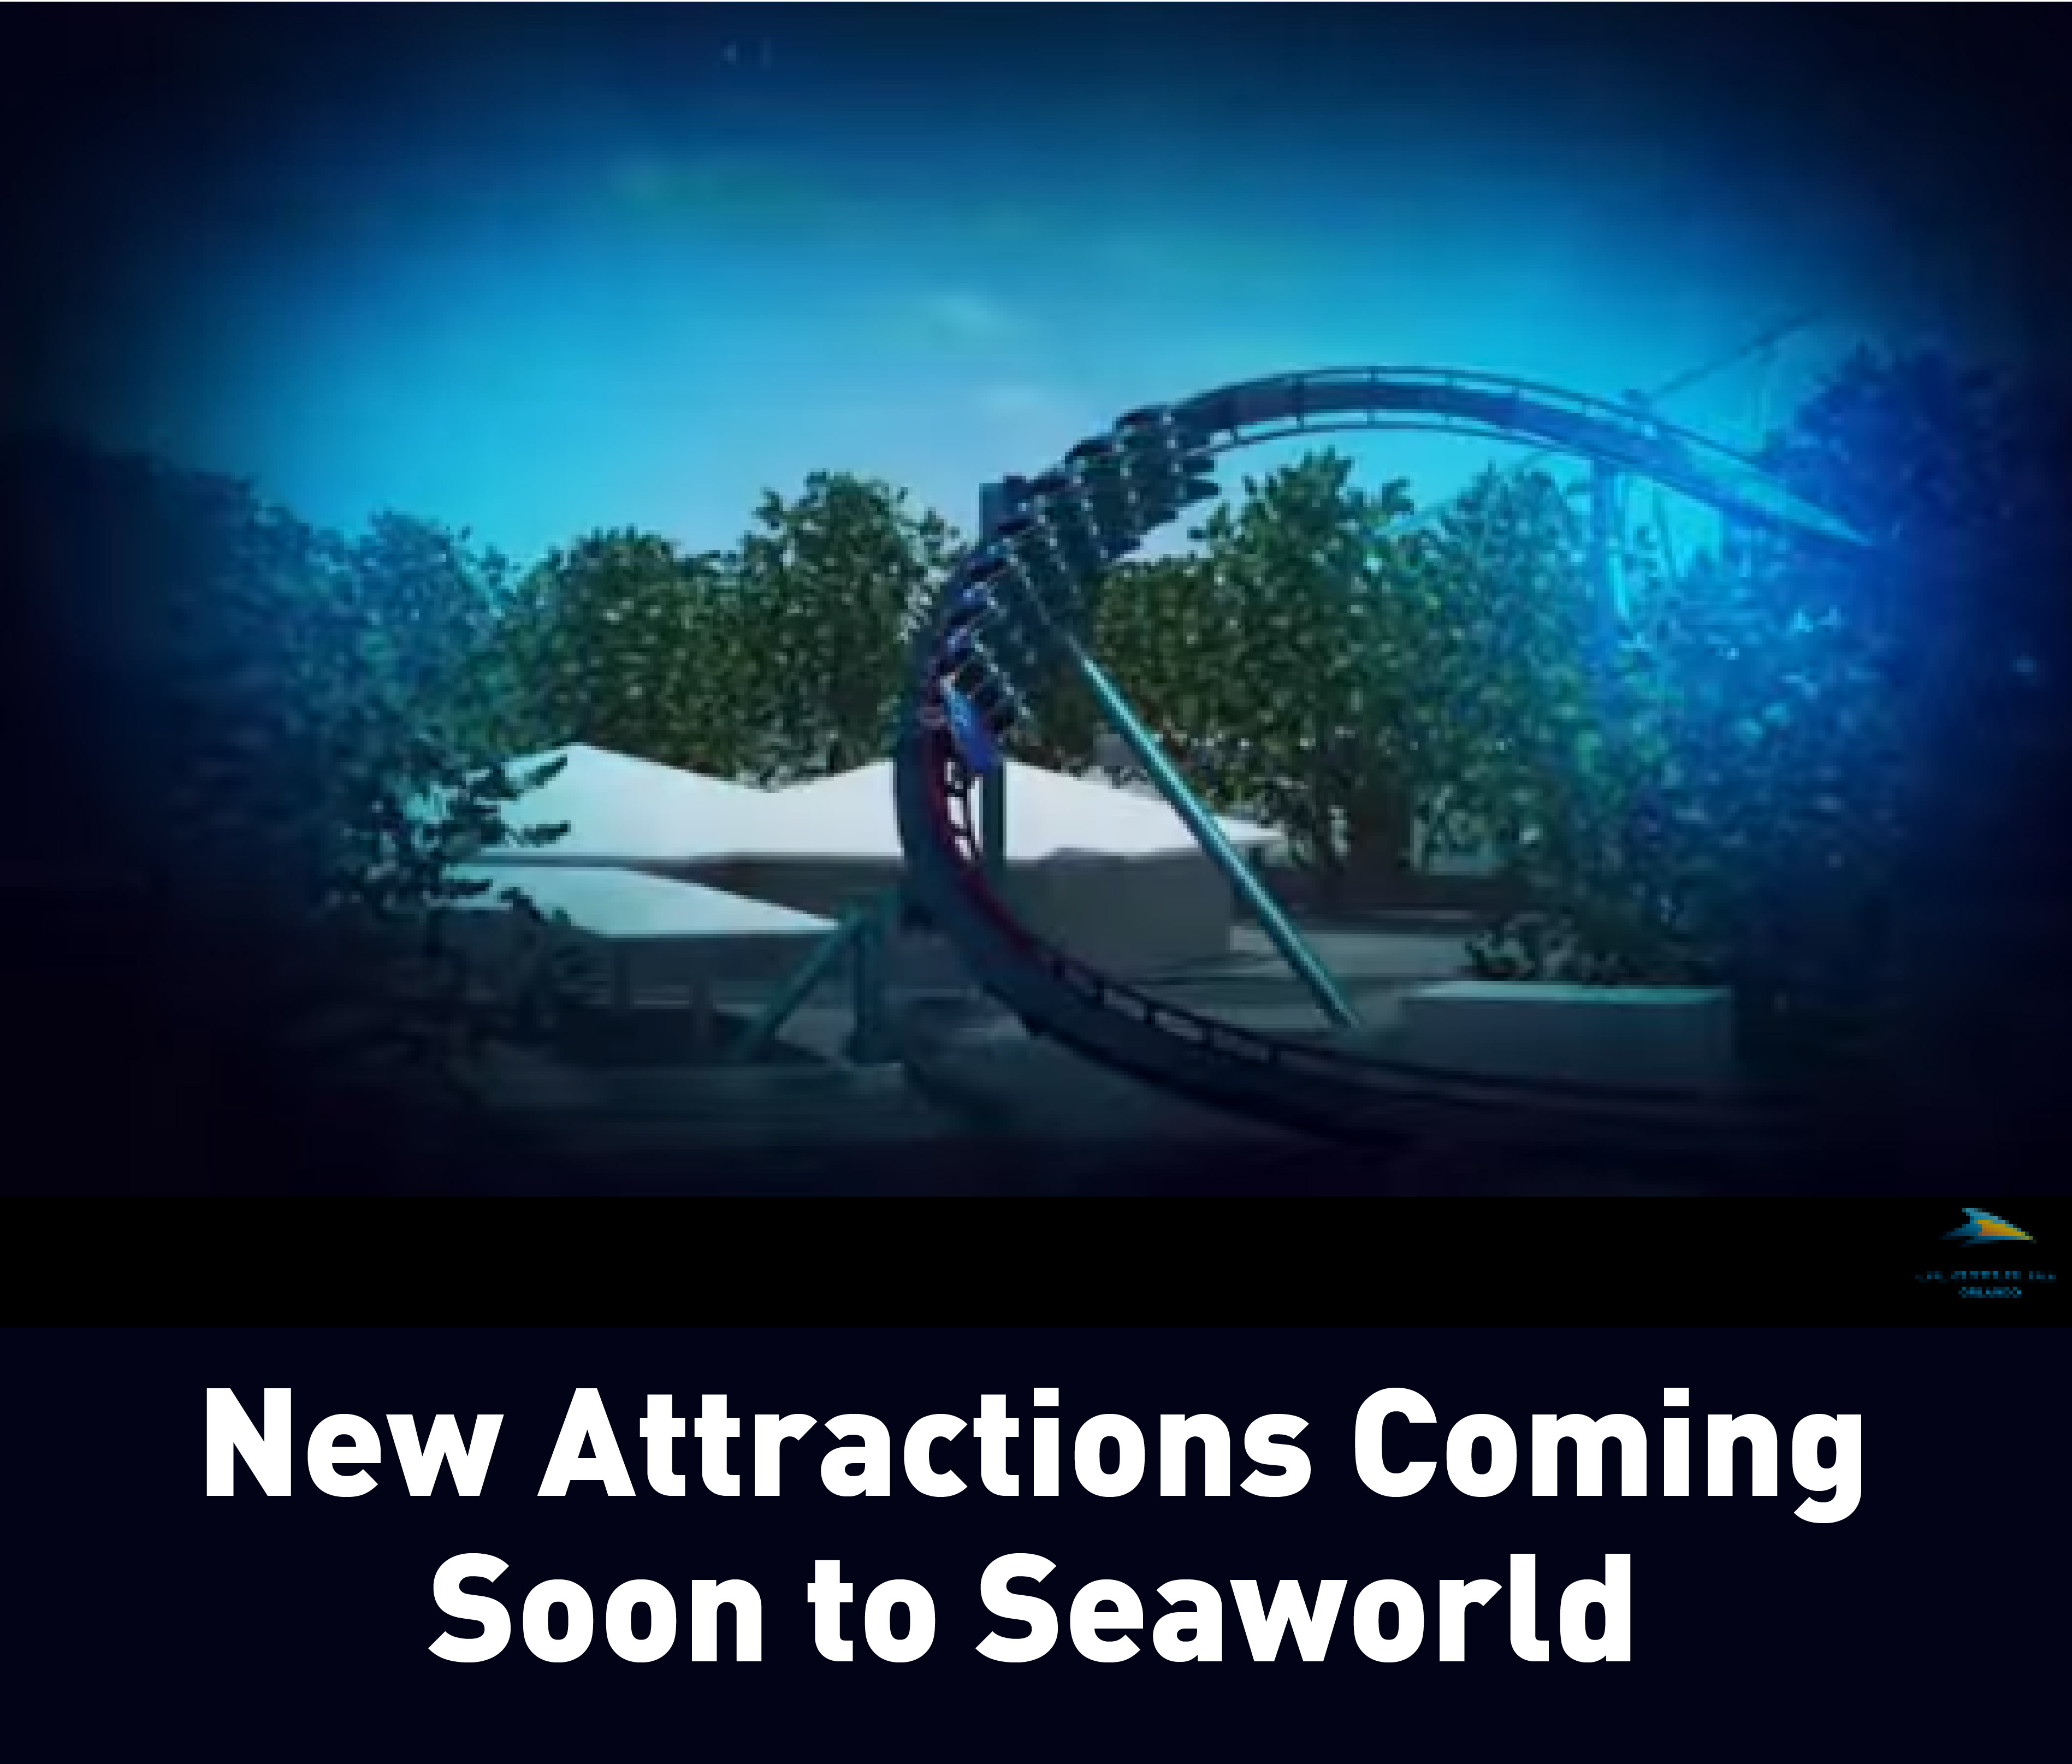 New Attractions Coming Soon to Seaworld